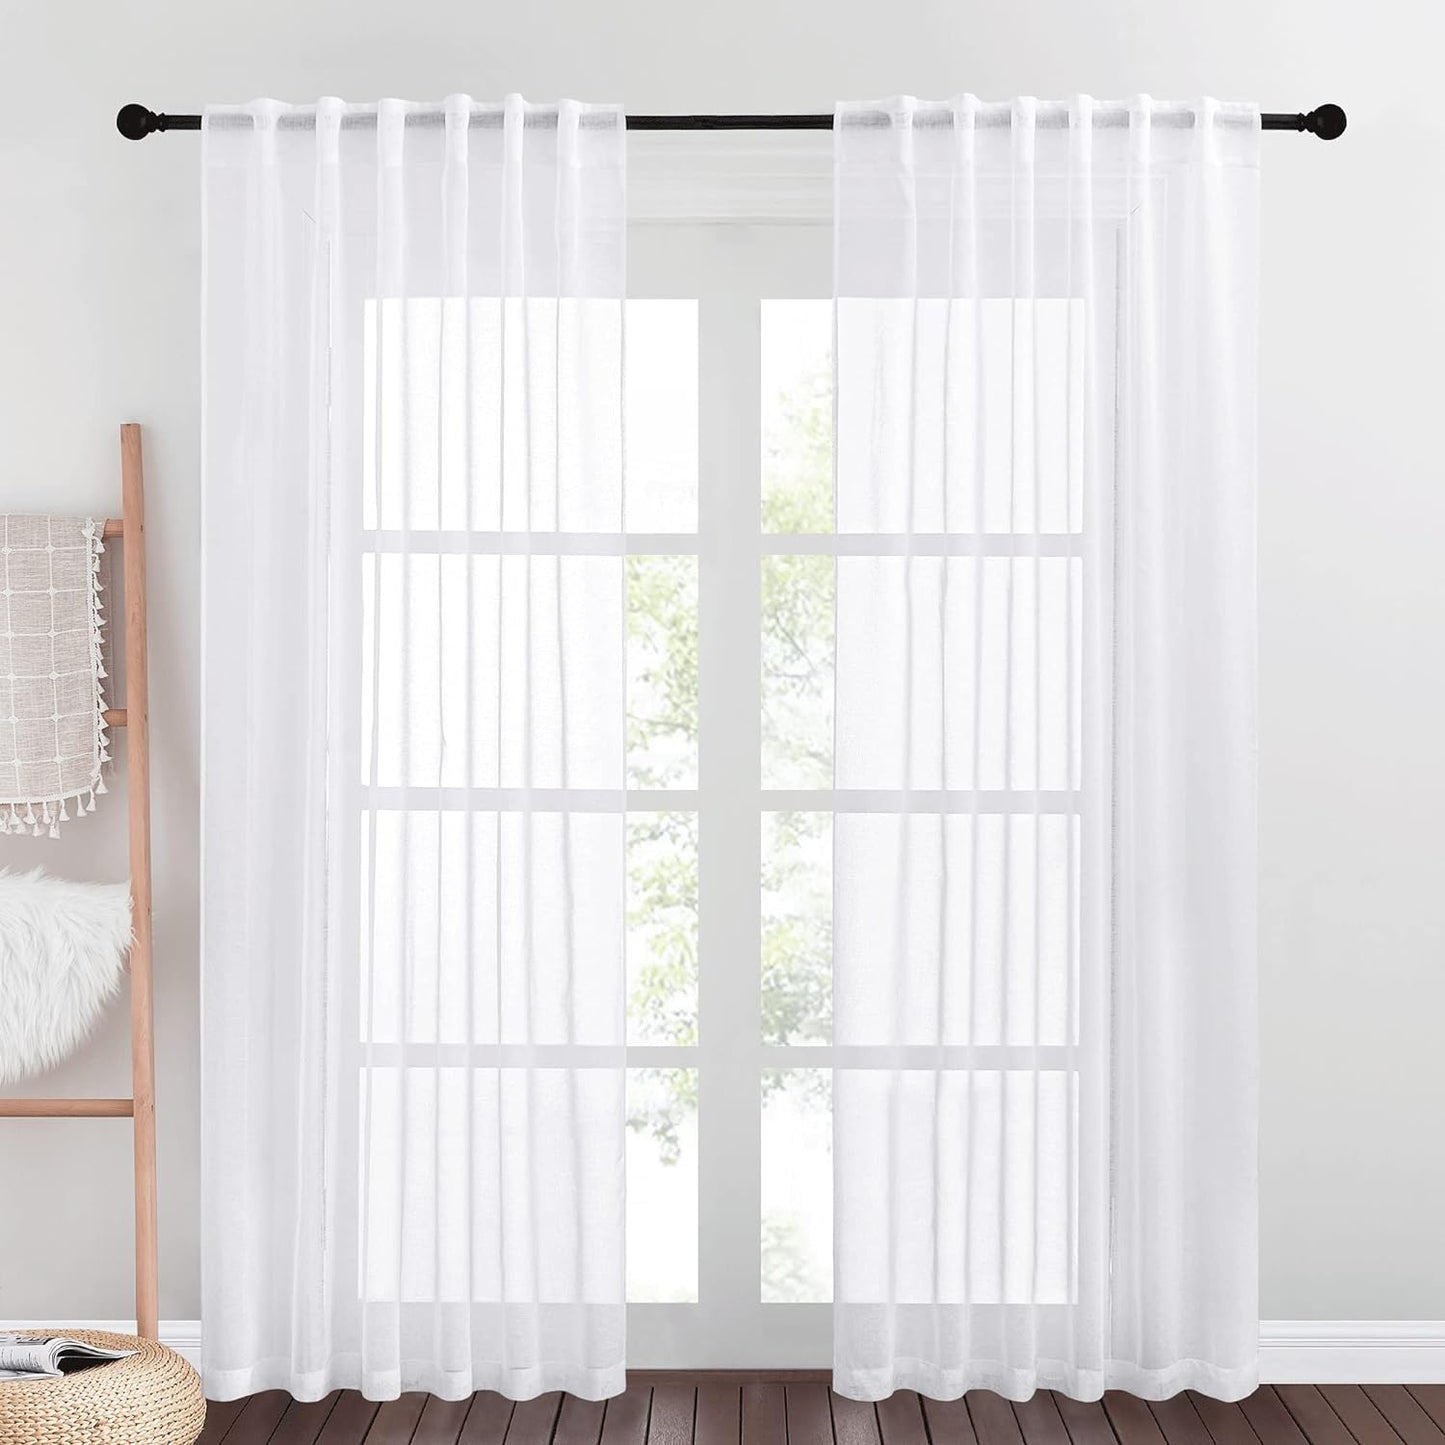 NICETOWN White Semi Sheer Curtains for Living Room- Linen Texture Light Airy Drapes, Rod Pocket & Back Tab Design Voile Panels for Large Window, Set of 2, 55 X 108 Inch  NICETOWN White W55 X L95 